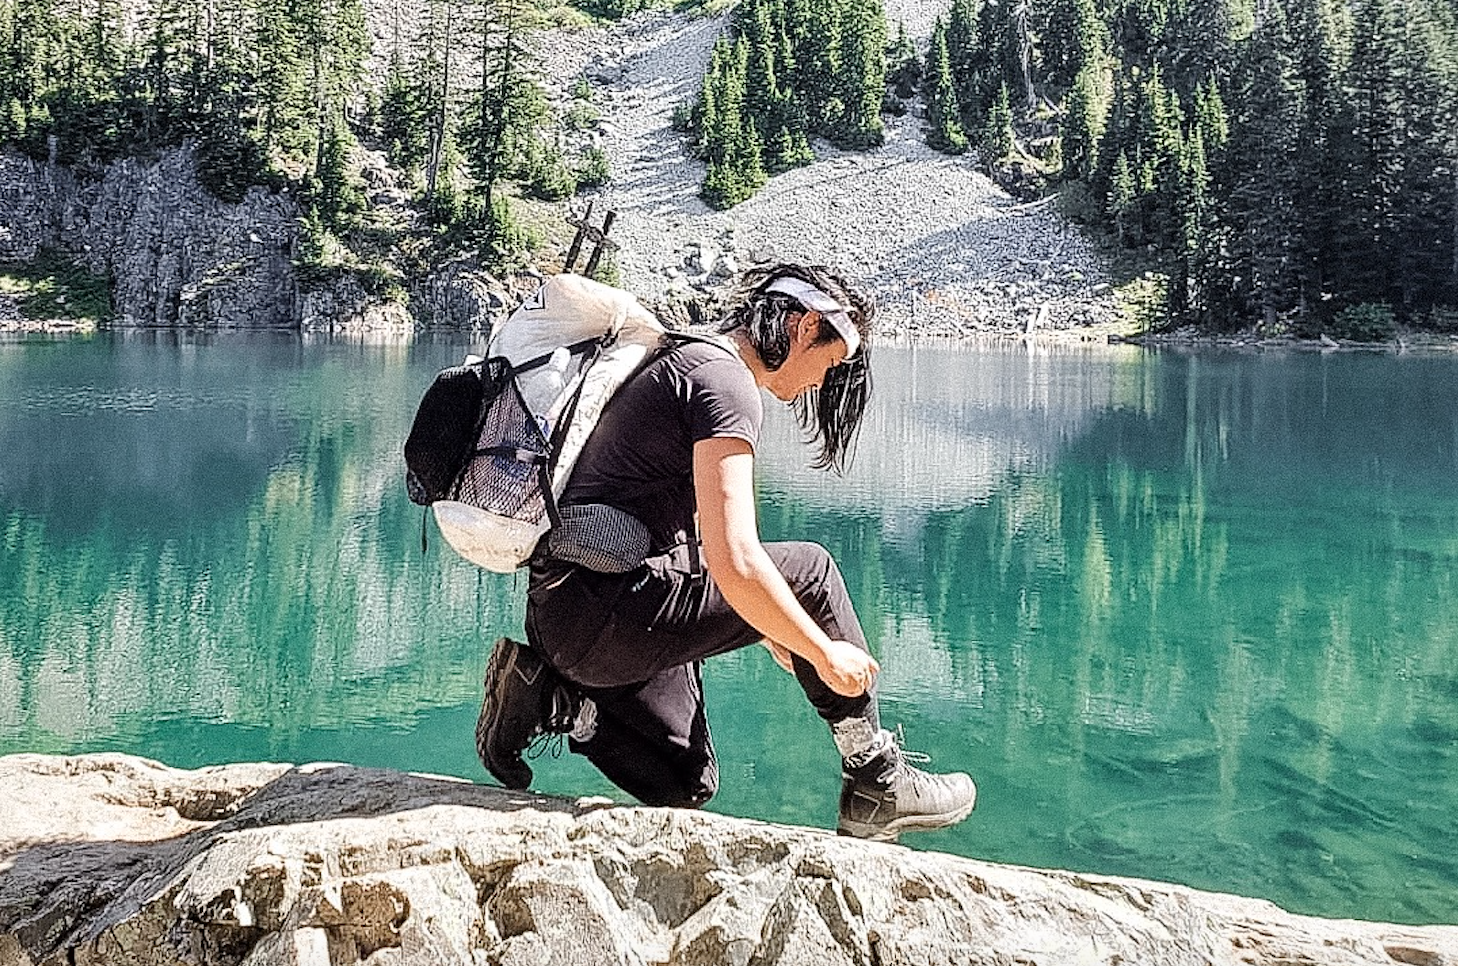 "Hiking in Washington State: A Beginner's Guide"